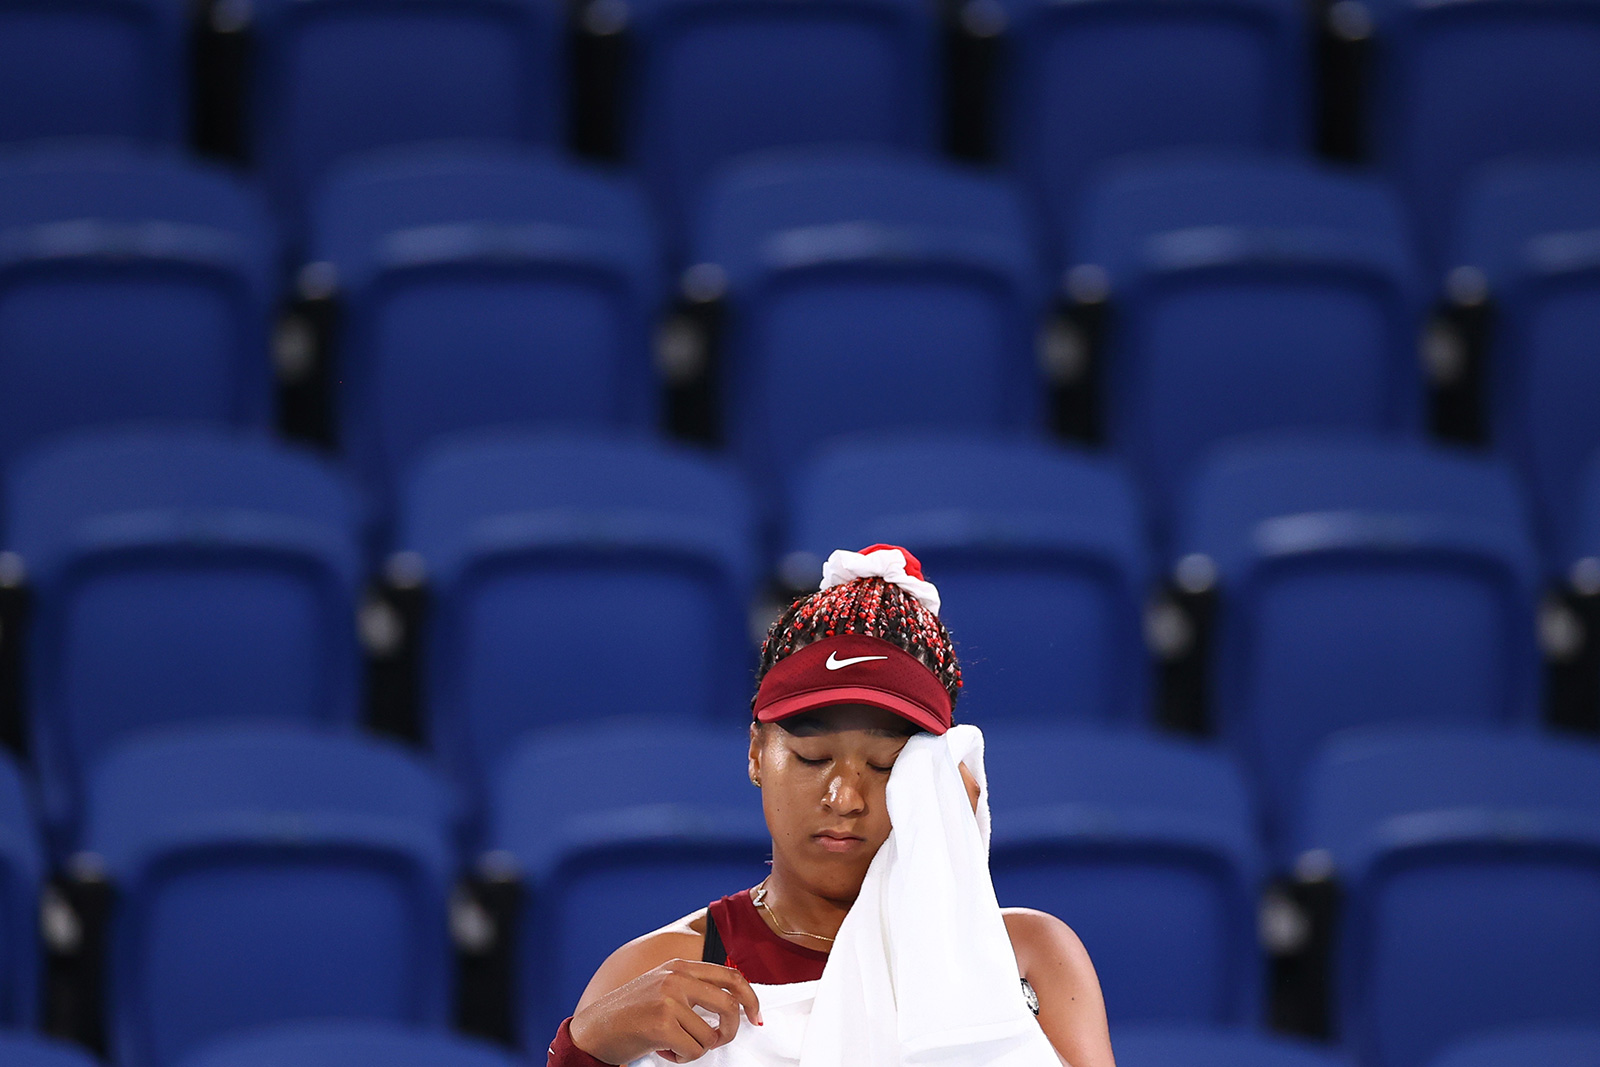 Japan's Naomi Osaka wipes her face after losing her third round match against Marketa Vondrousova of the Czech Republic on Tuesday.